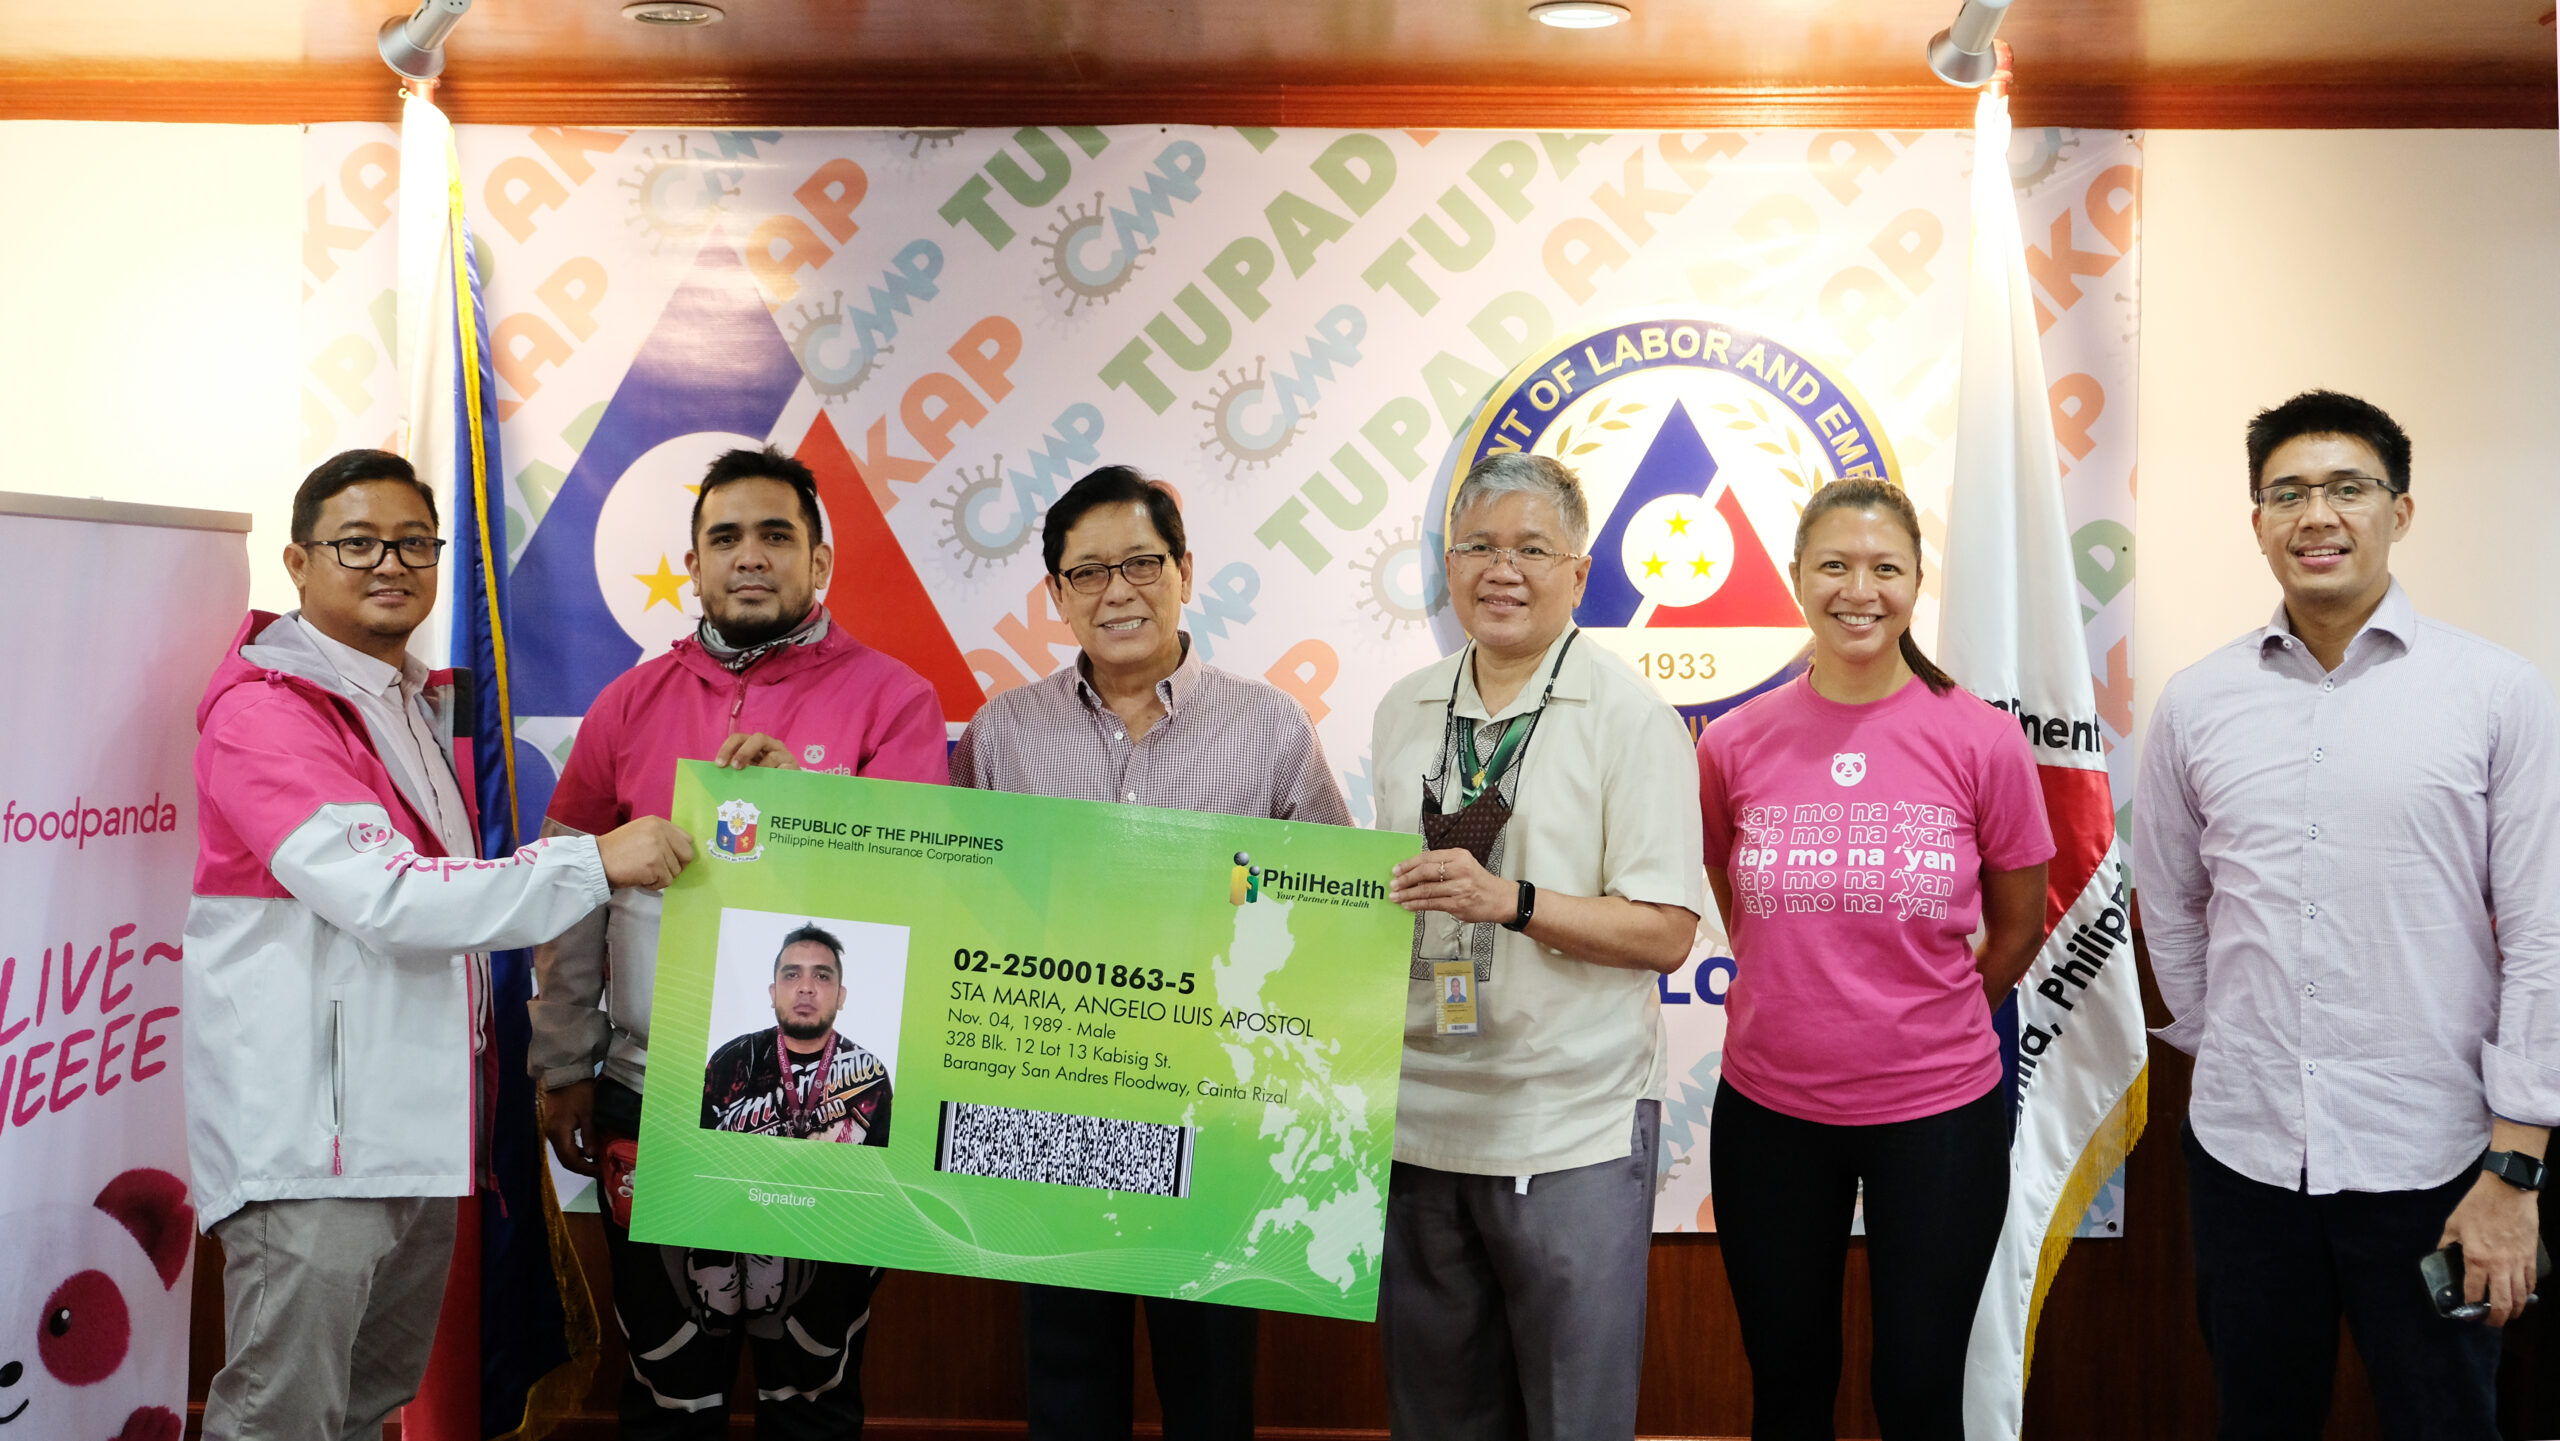 foodpanda, PhilHealth launch partnership for delivery partners’ access to gov’t health benefits